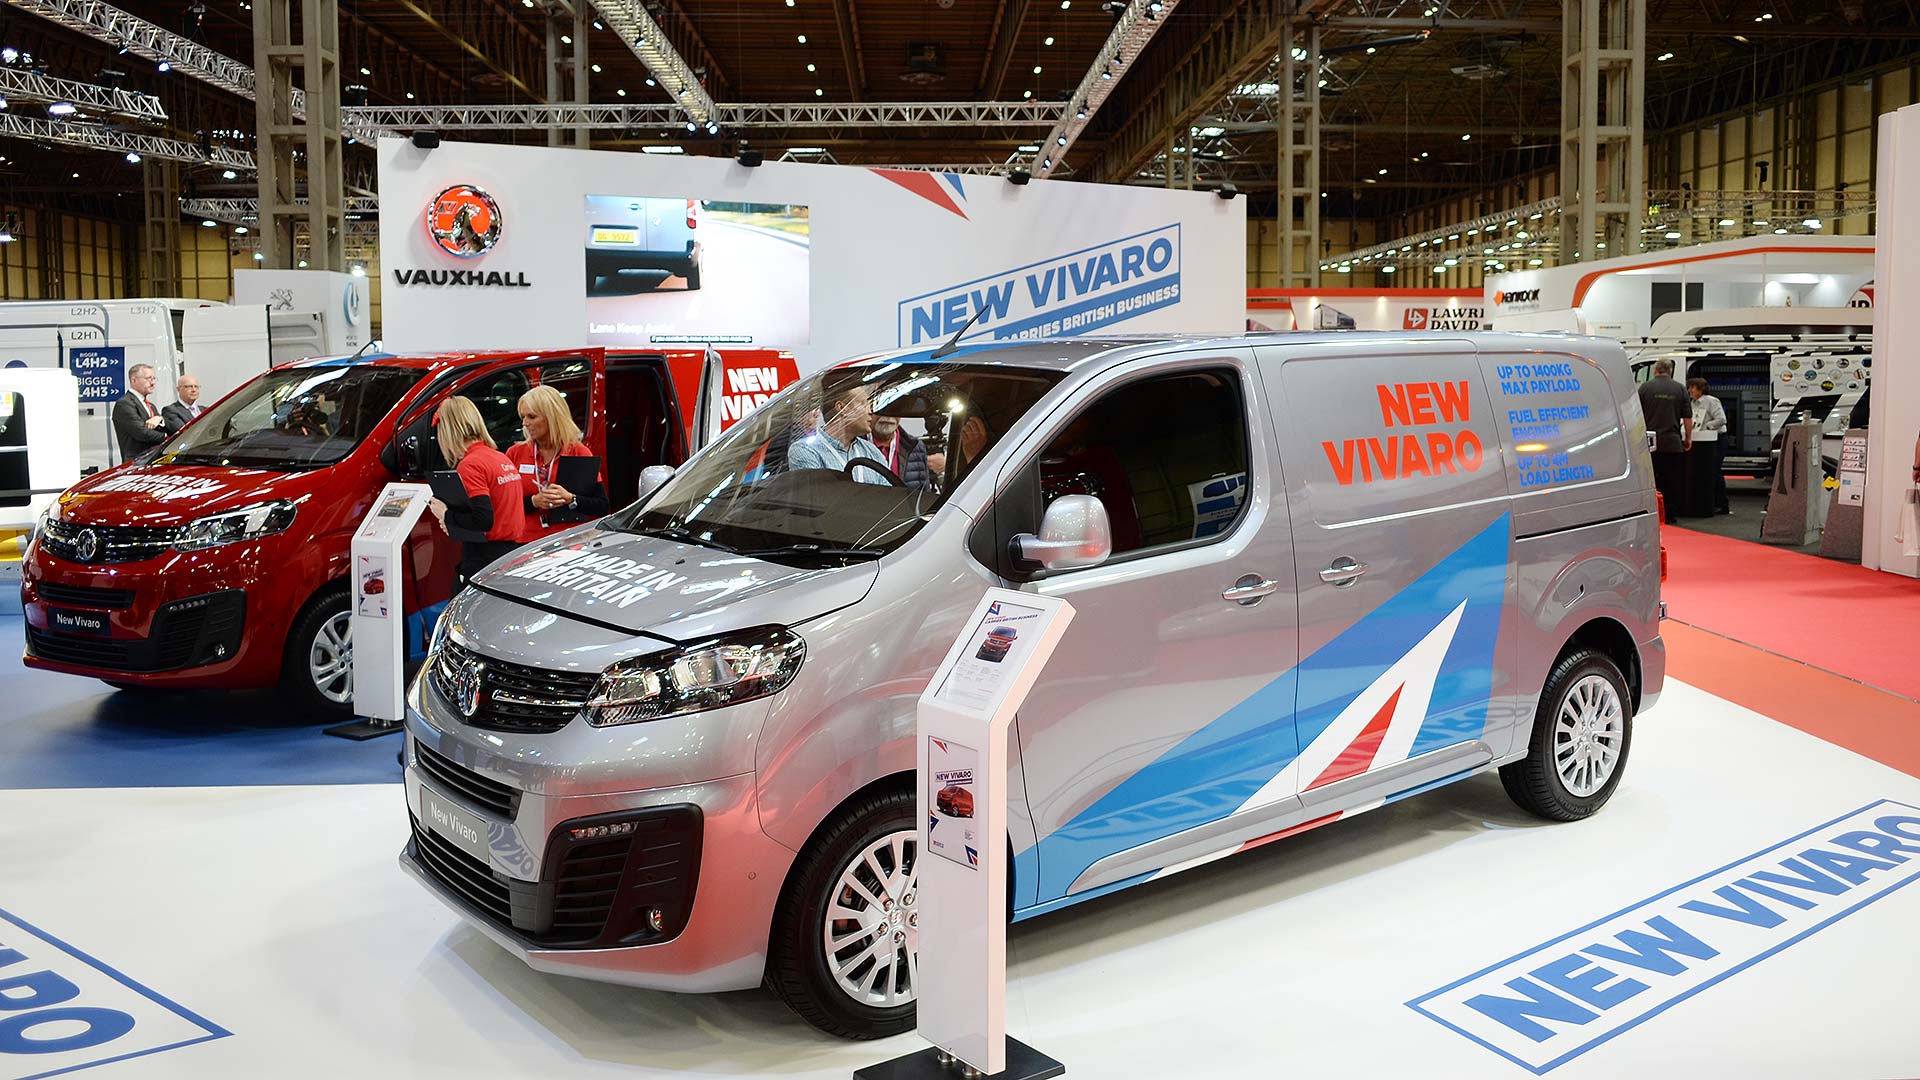 The VW Caddy Black Edition at The CV Show